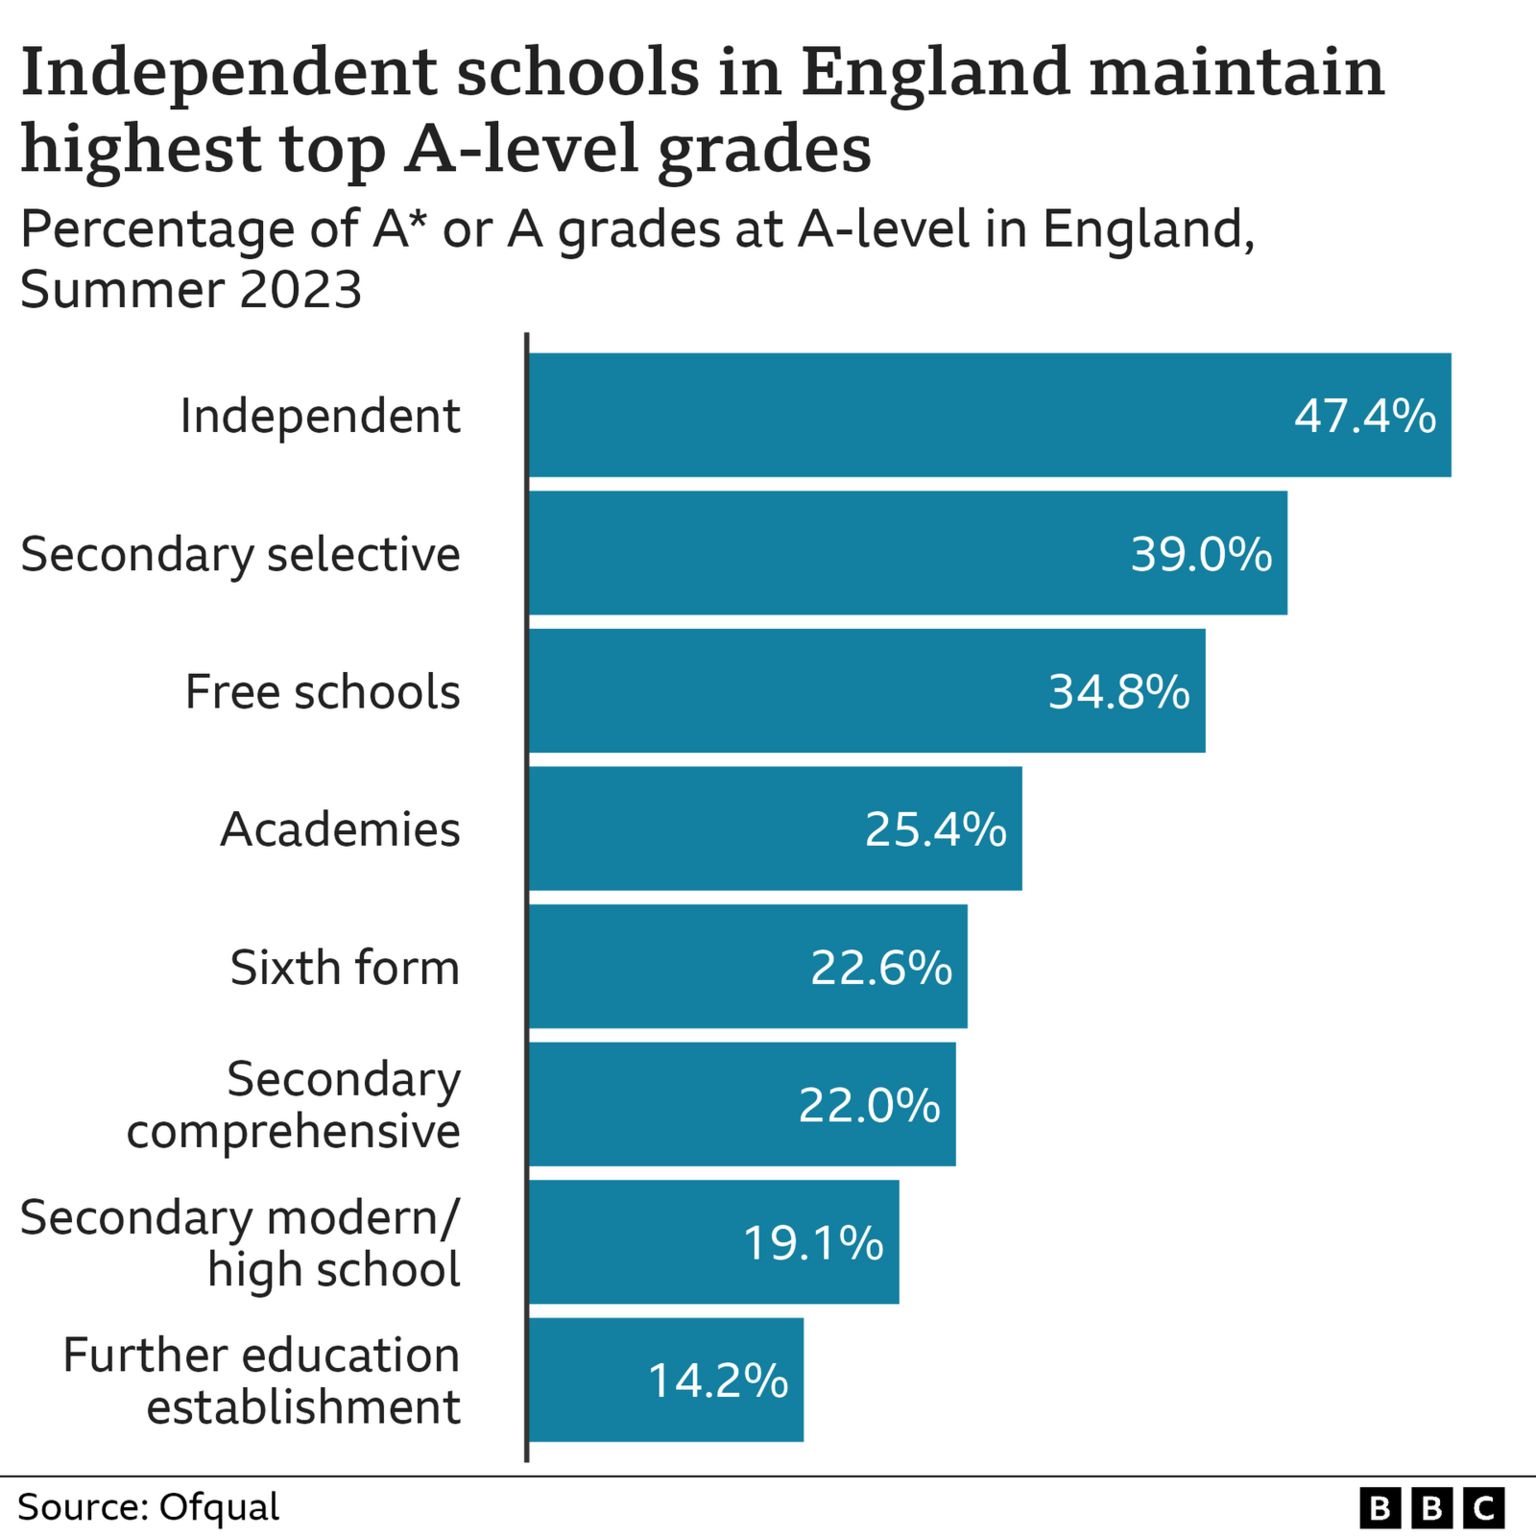 Chart showing that independent schools in England maintain the highest top A-level grades